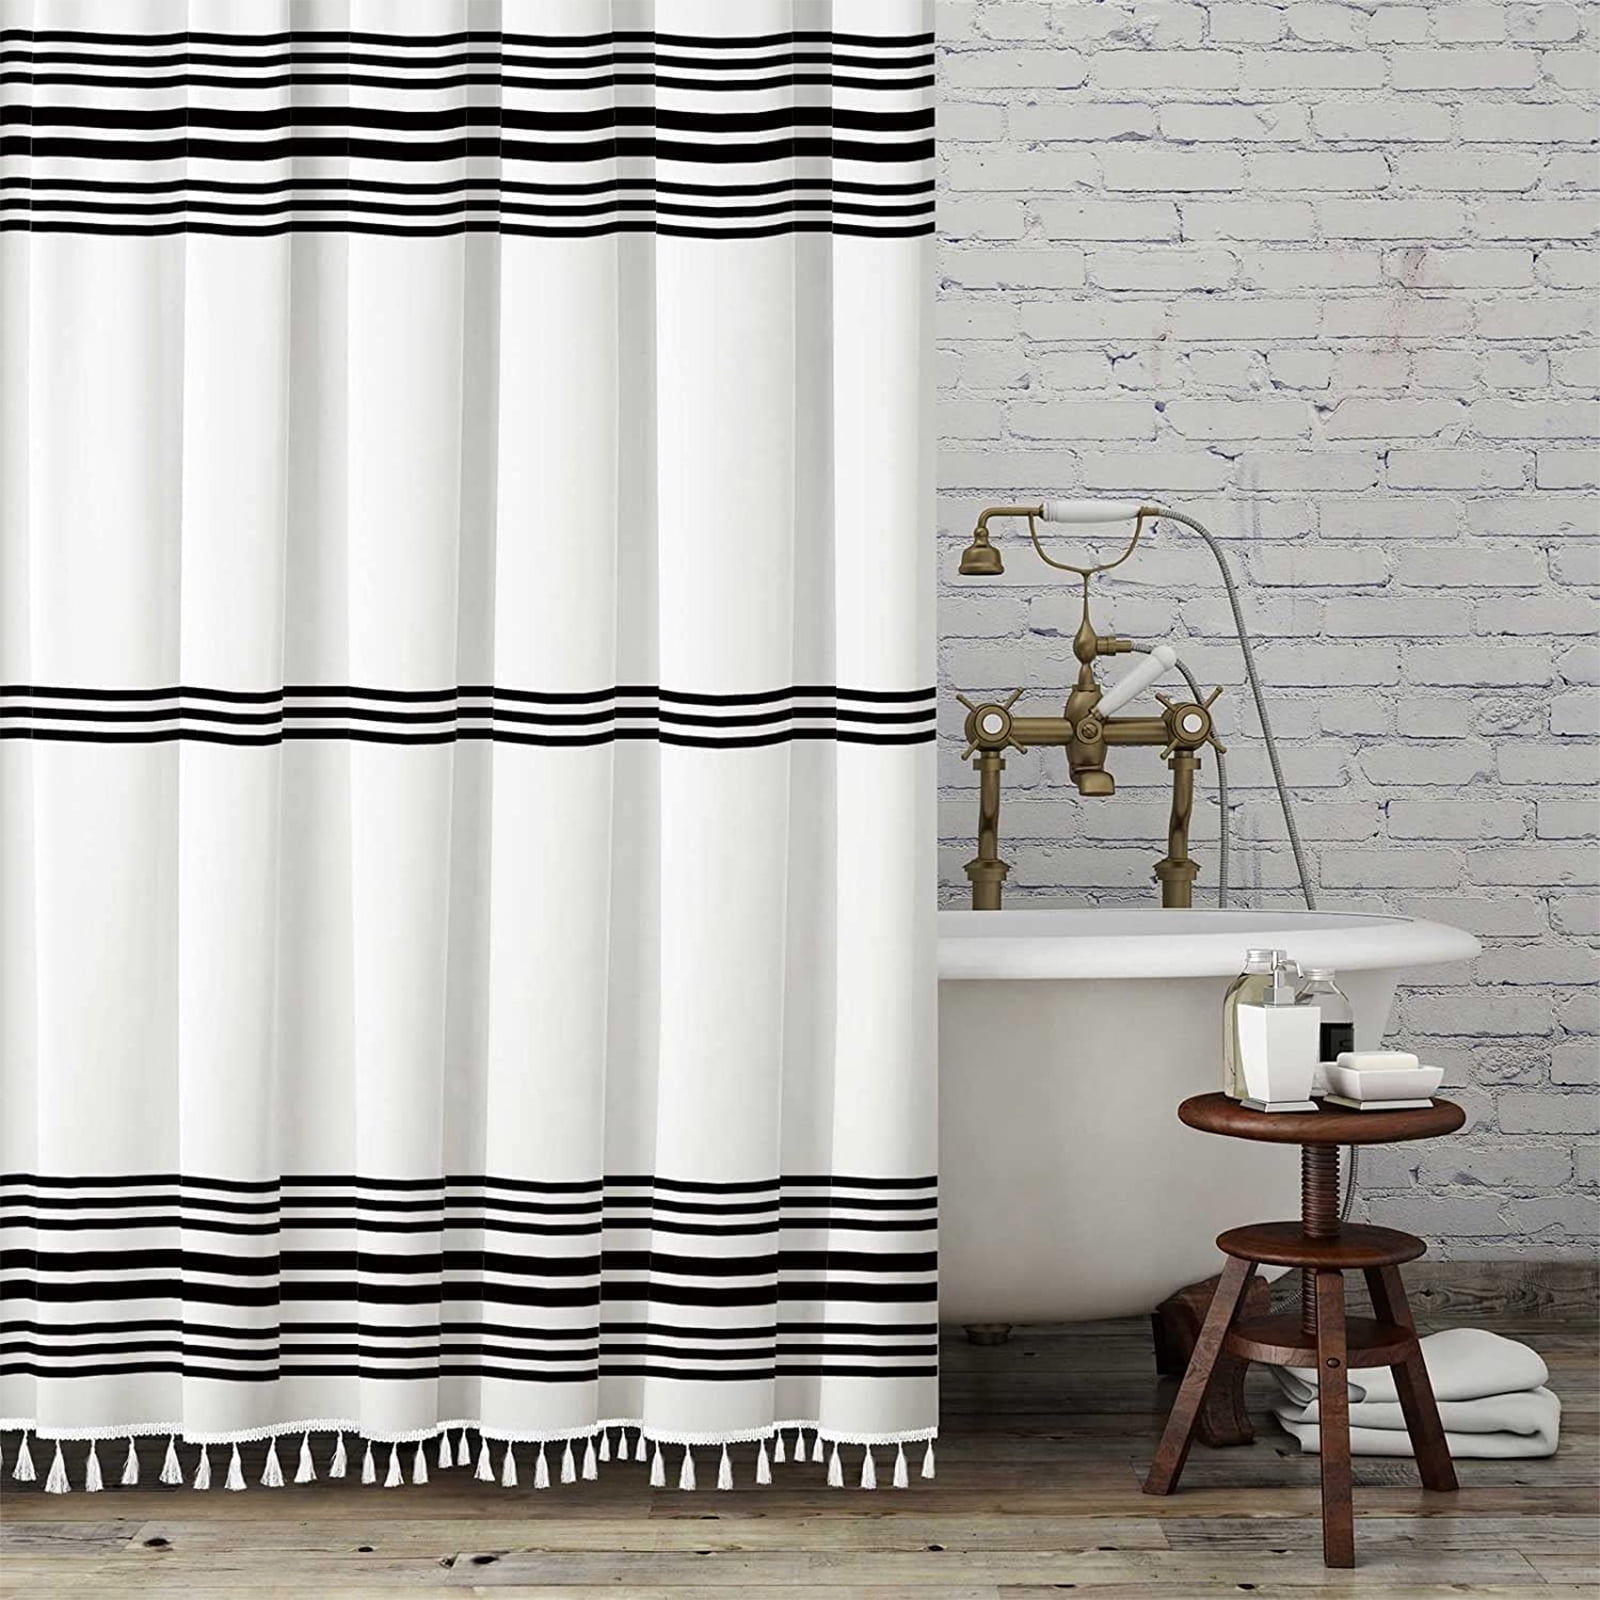 Details about   Abstract Simple Black Stripes White Fabric Shower Curtain Set Bathroom Decor 72" 